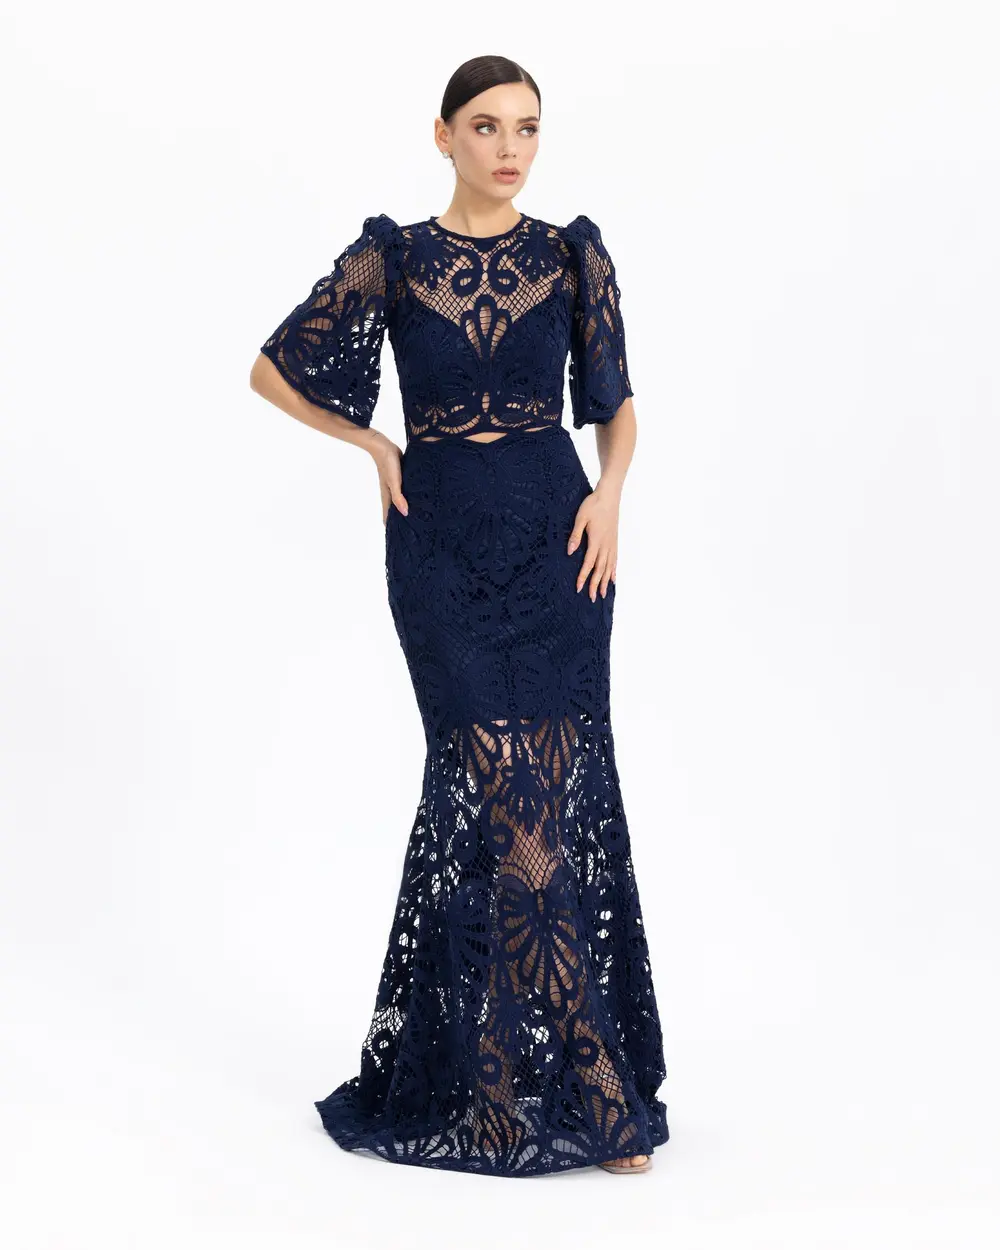 FISH FORM TROVACARD SLEEVE LACE EVENING DRESS